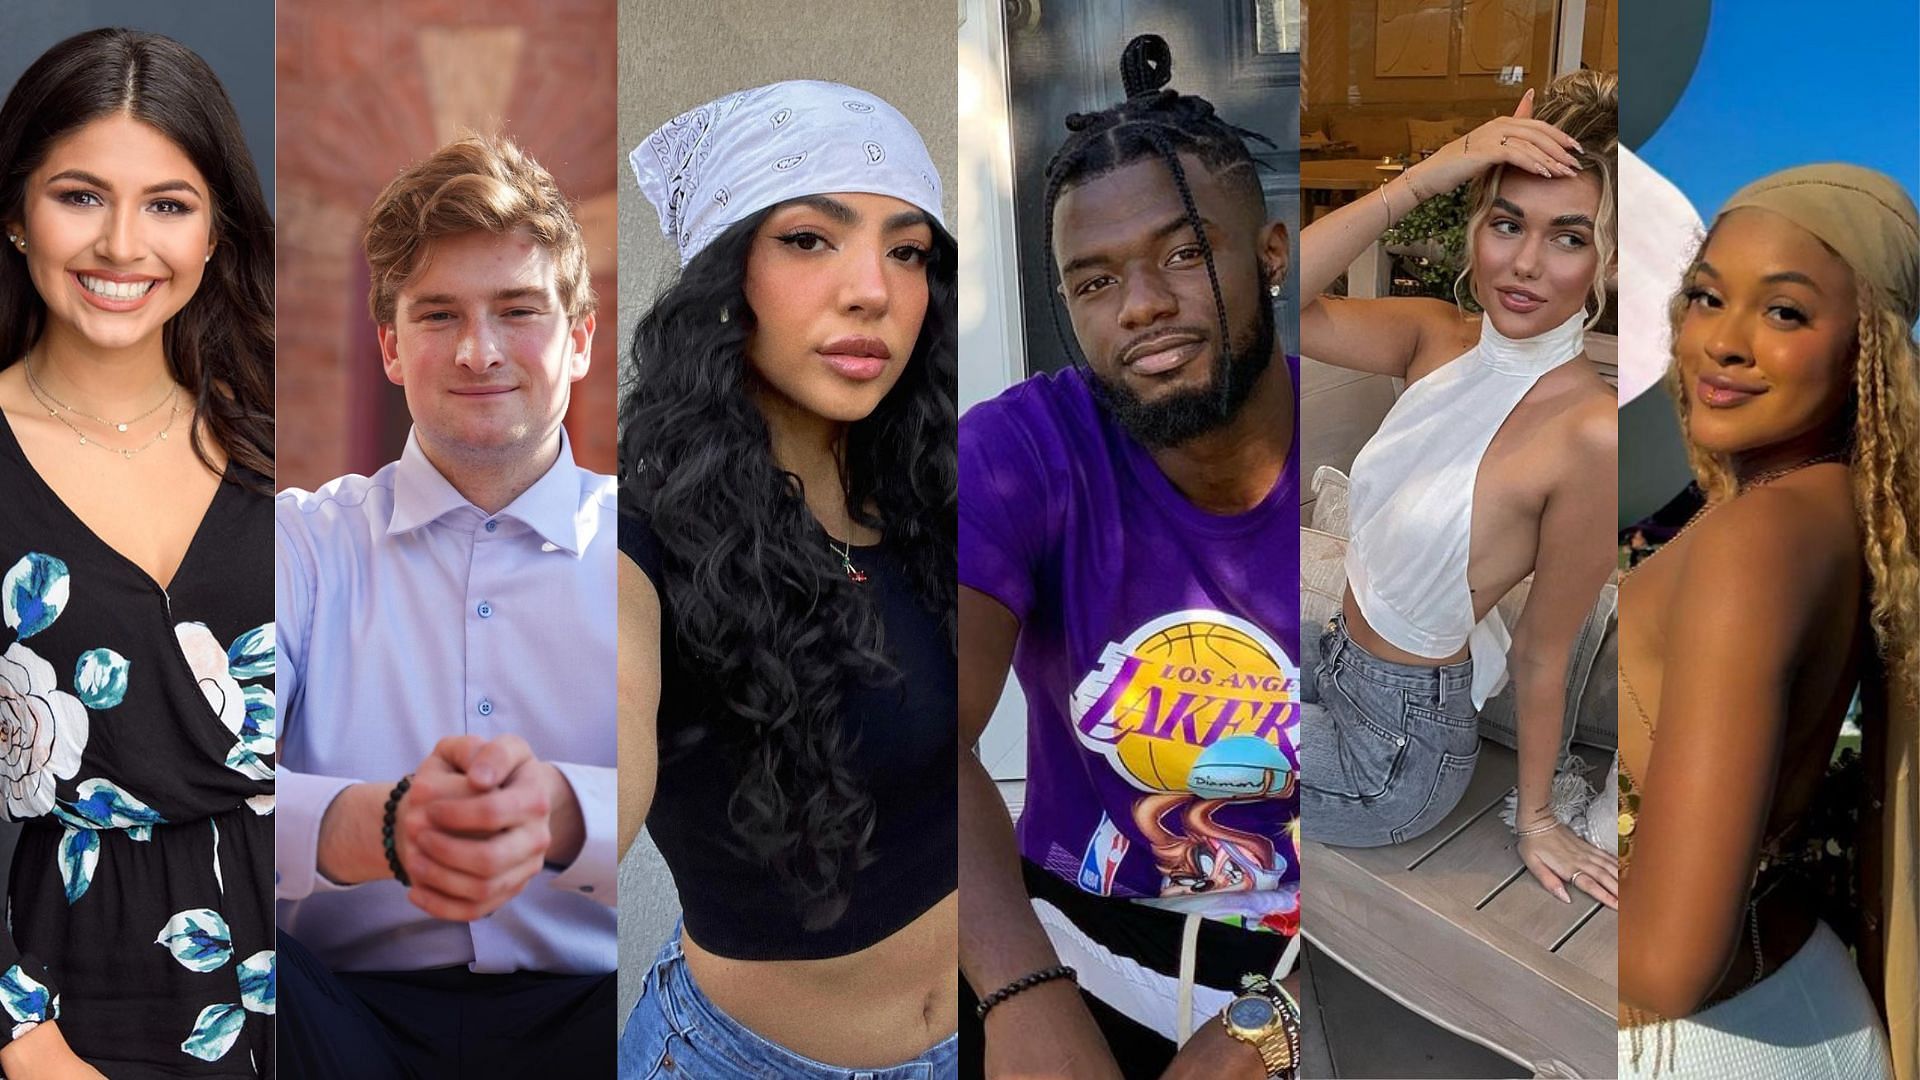 Love Island USA contestants get emotional after family messages. (Images via Instagram/@kass.c @bergielicious35 @johnnieolivia @kylito623 @carmen_kocourek and @misshannnahw)